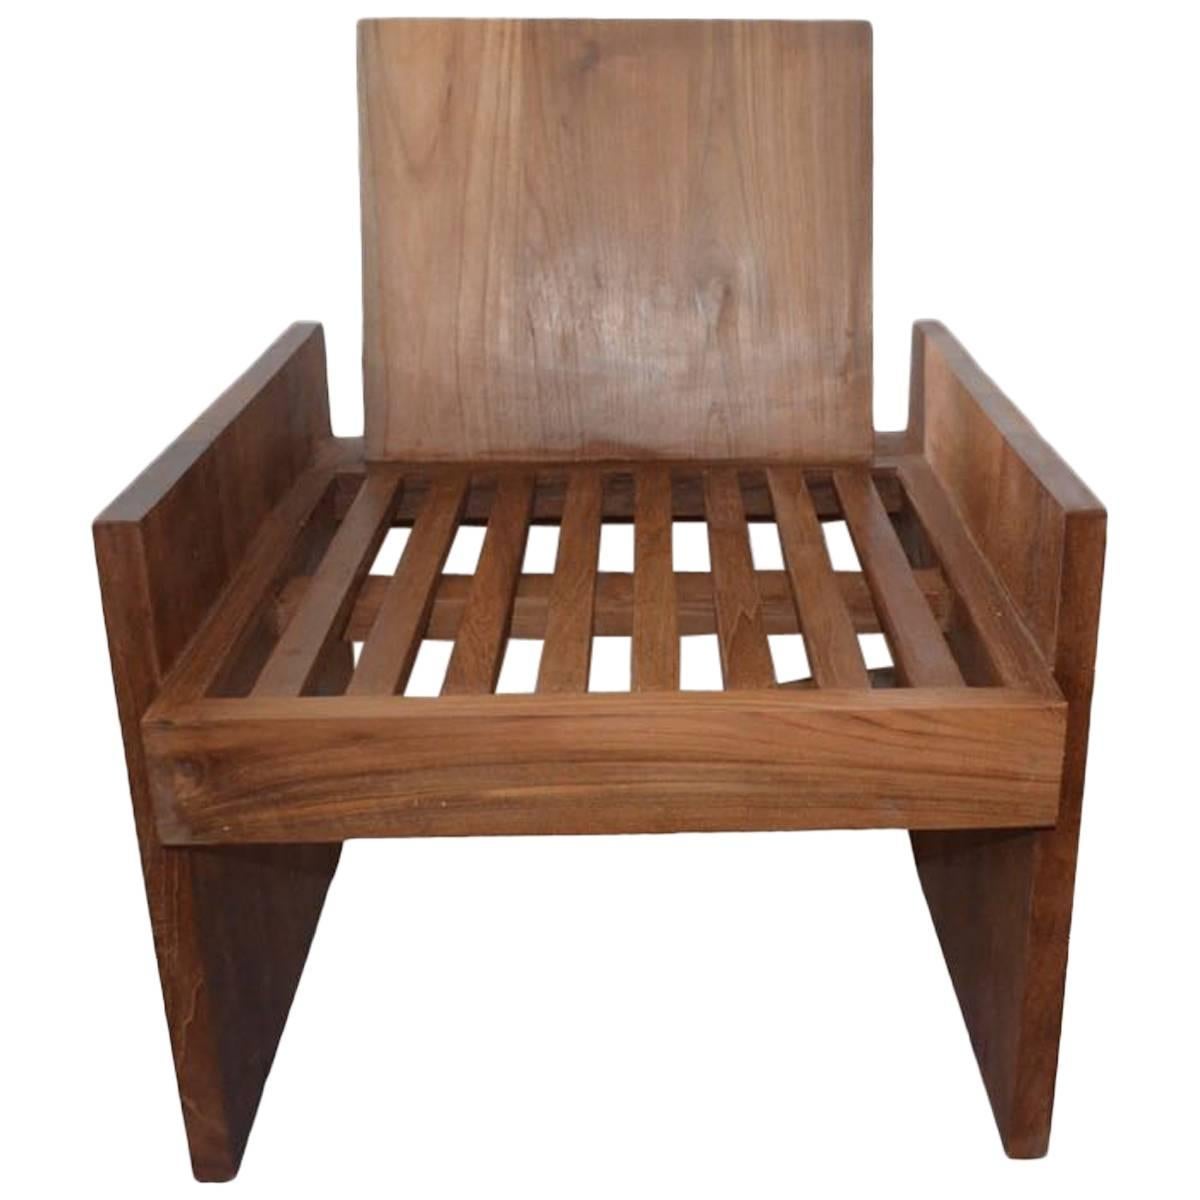 Reclaimed teak wood armchair. Part of the Spa Collection which also features sofas in the same style. Finished with a natural oil revealing the beautiful wood grain. Also available with a white wash. Full dimensions; Seat 16